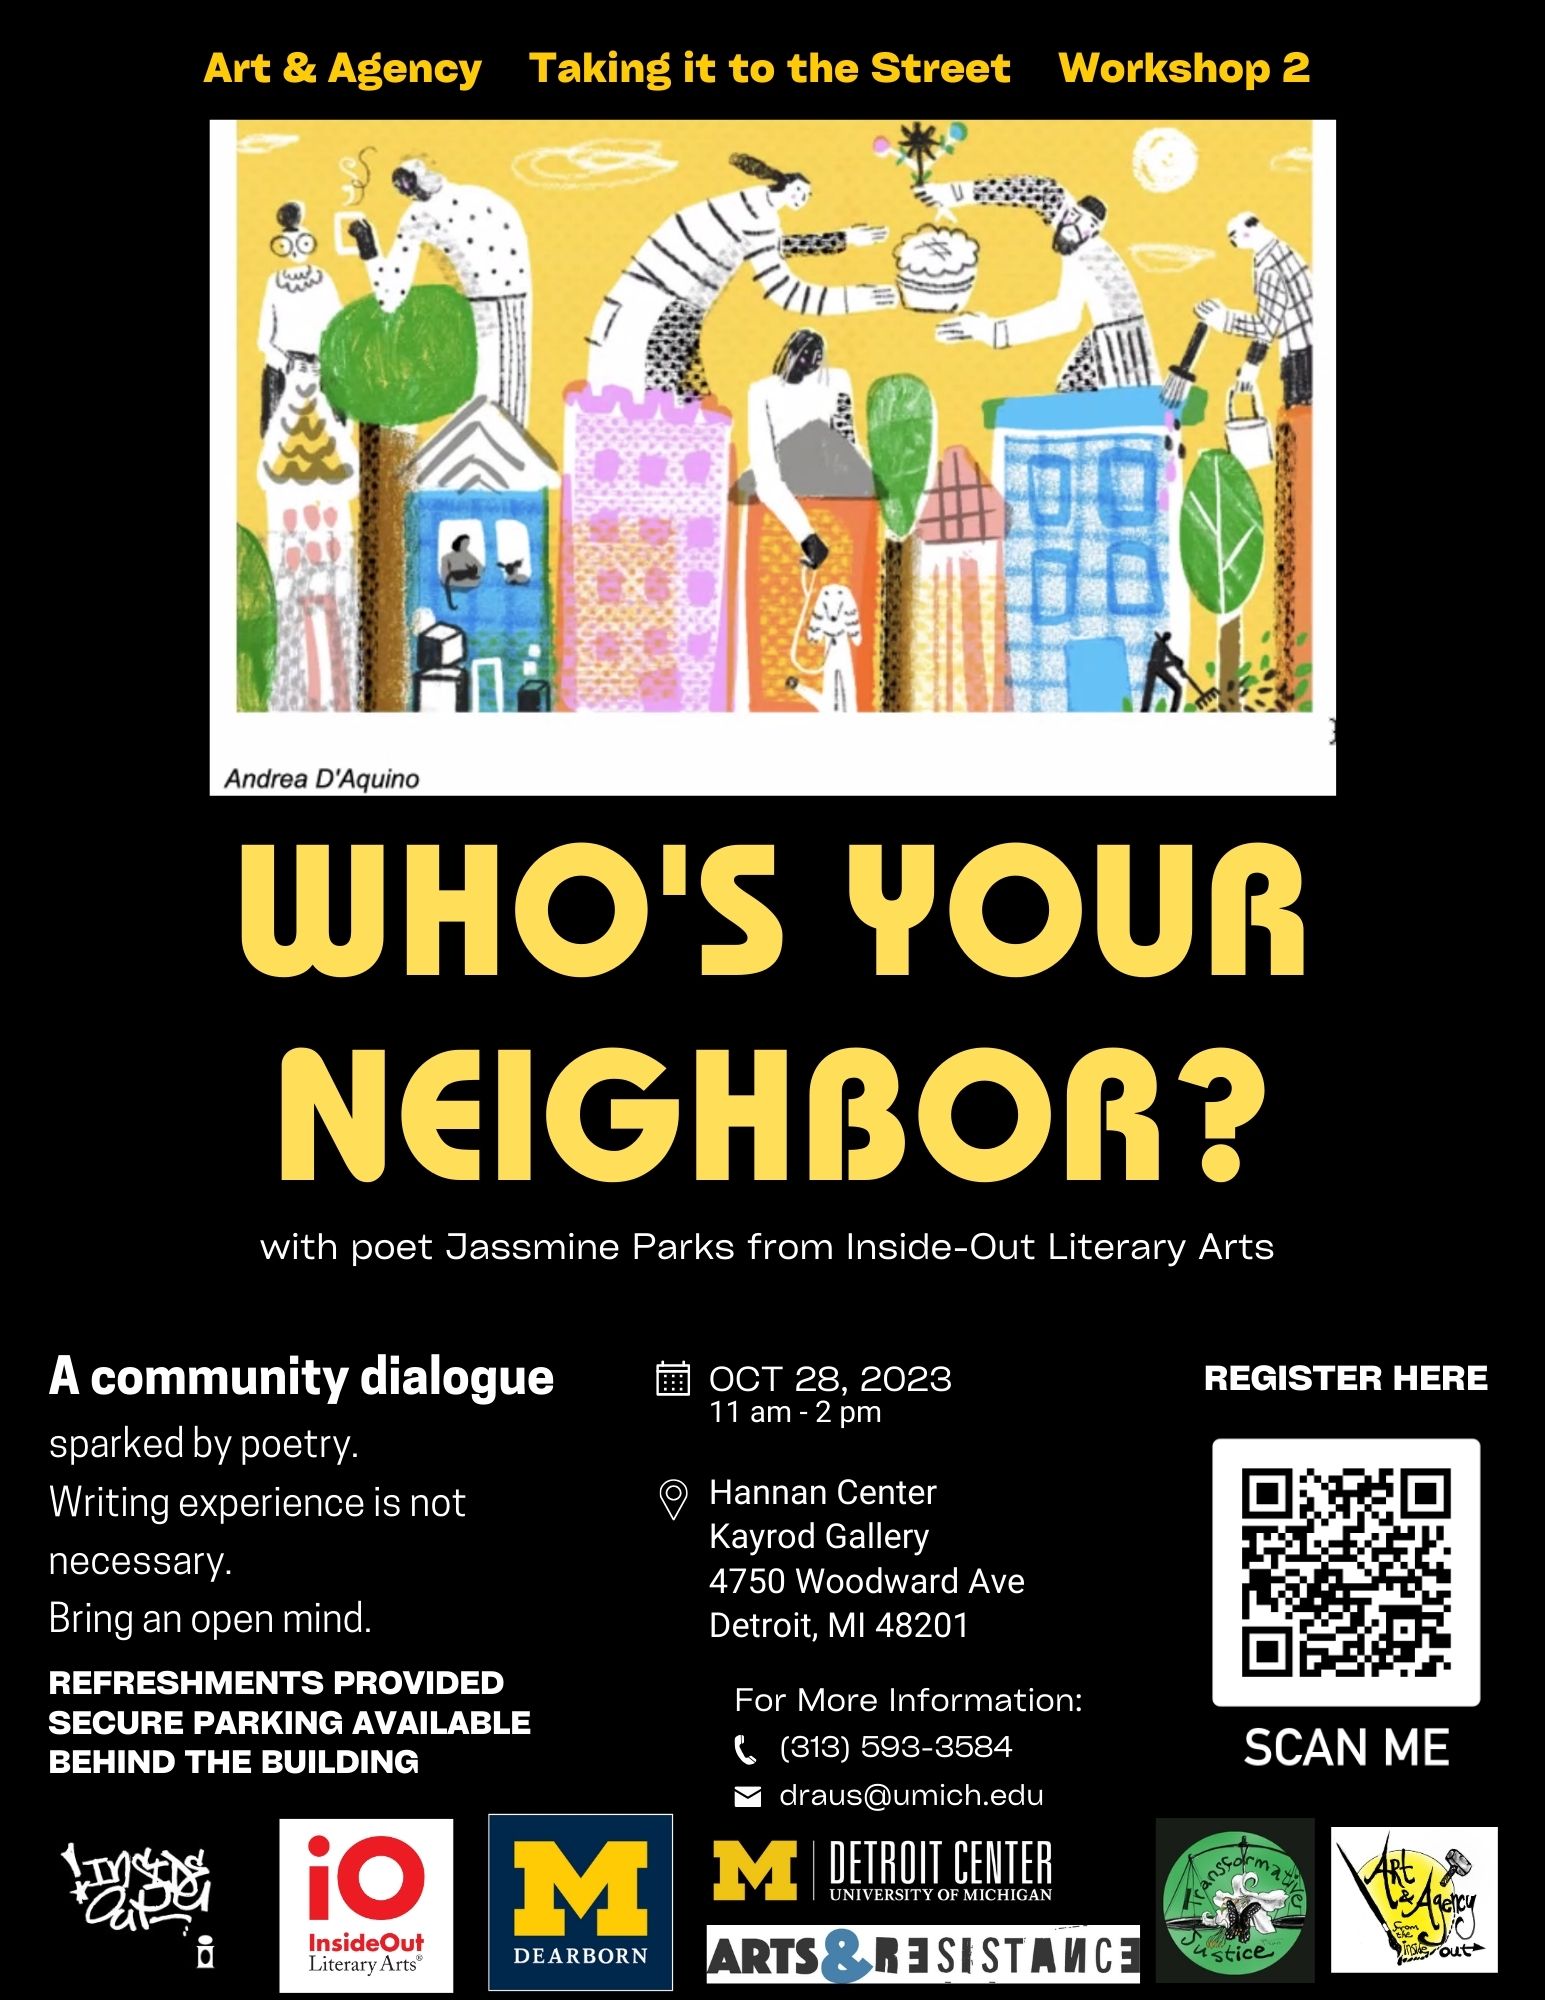 flyer for who's your neighbor? event on october 23rd at the hannan center in Detroit